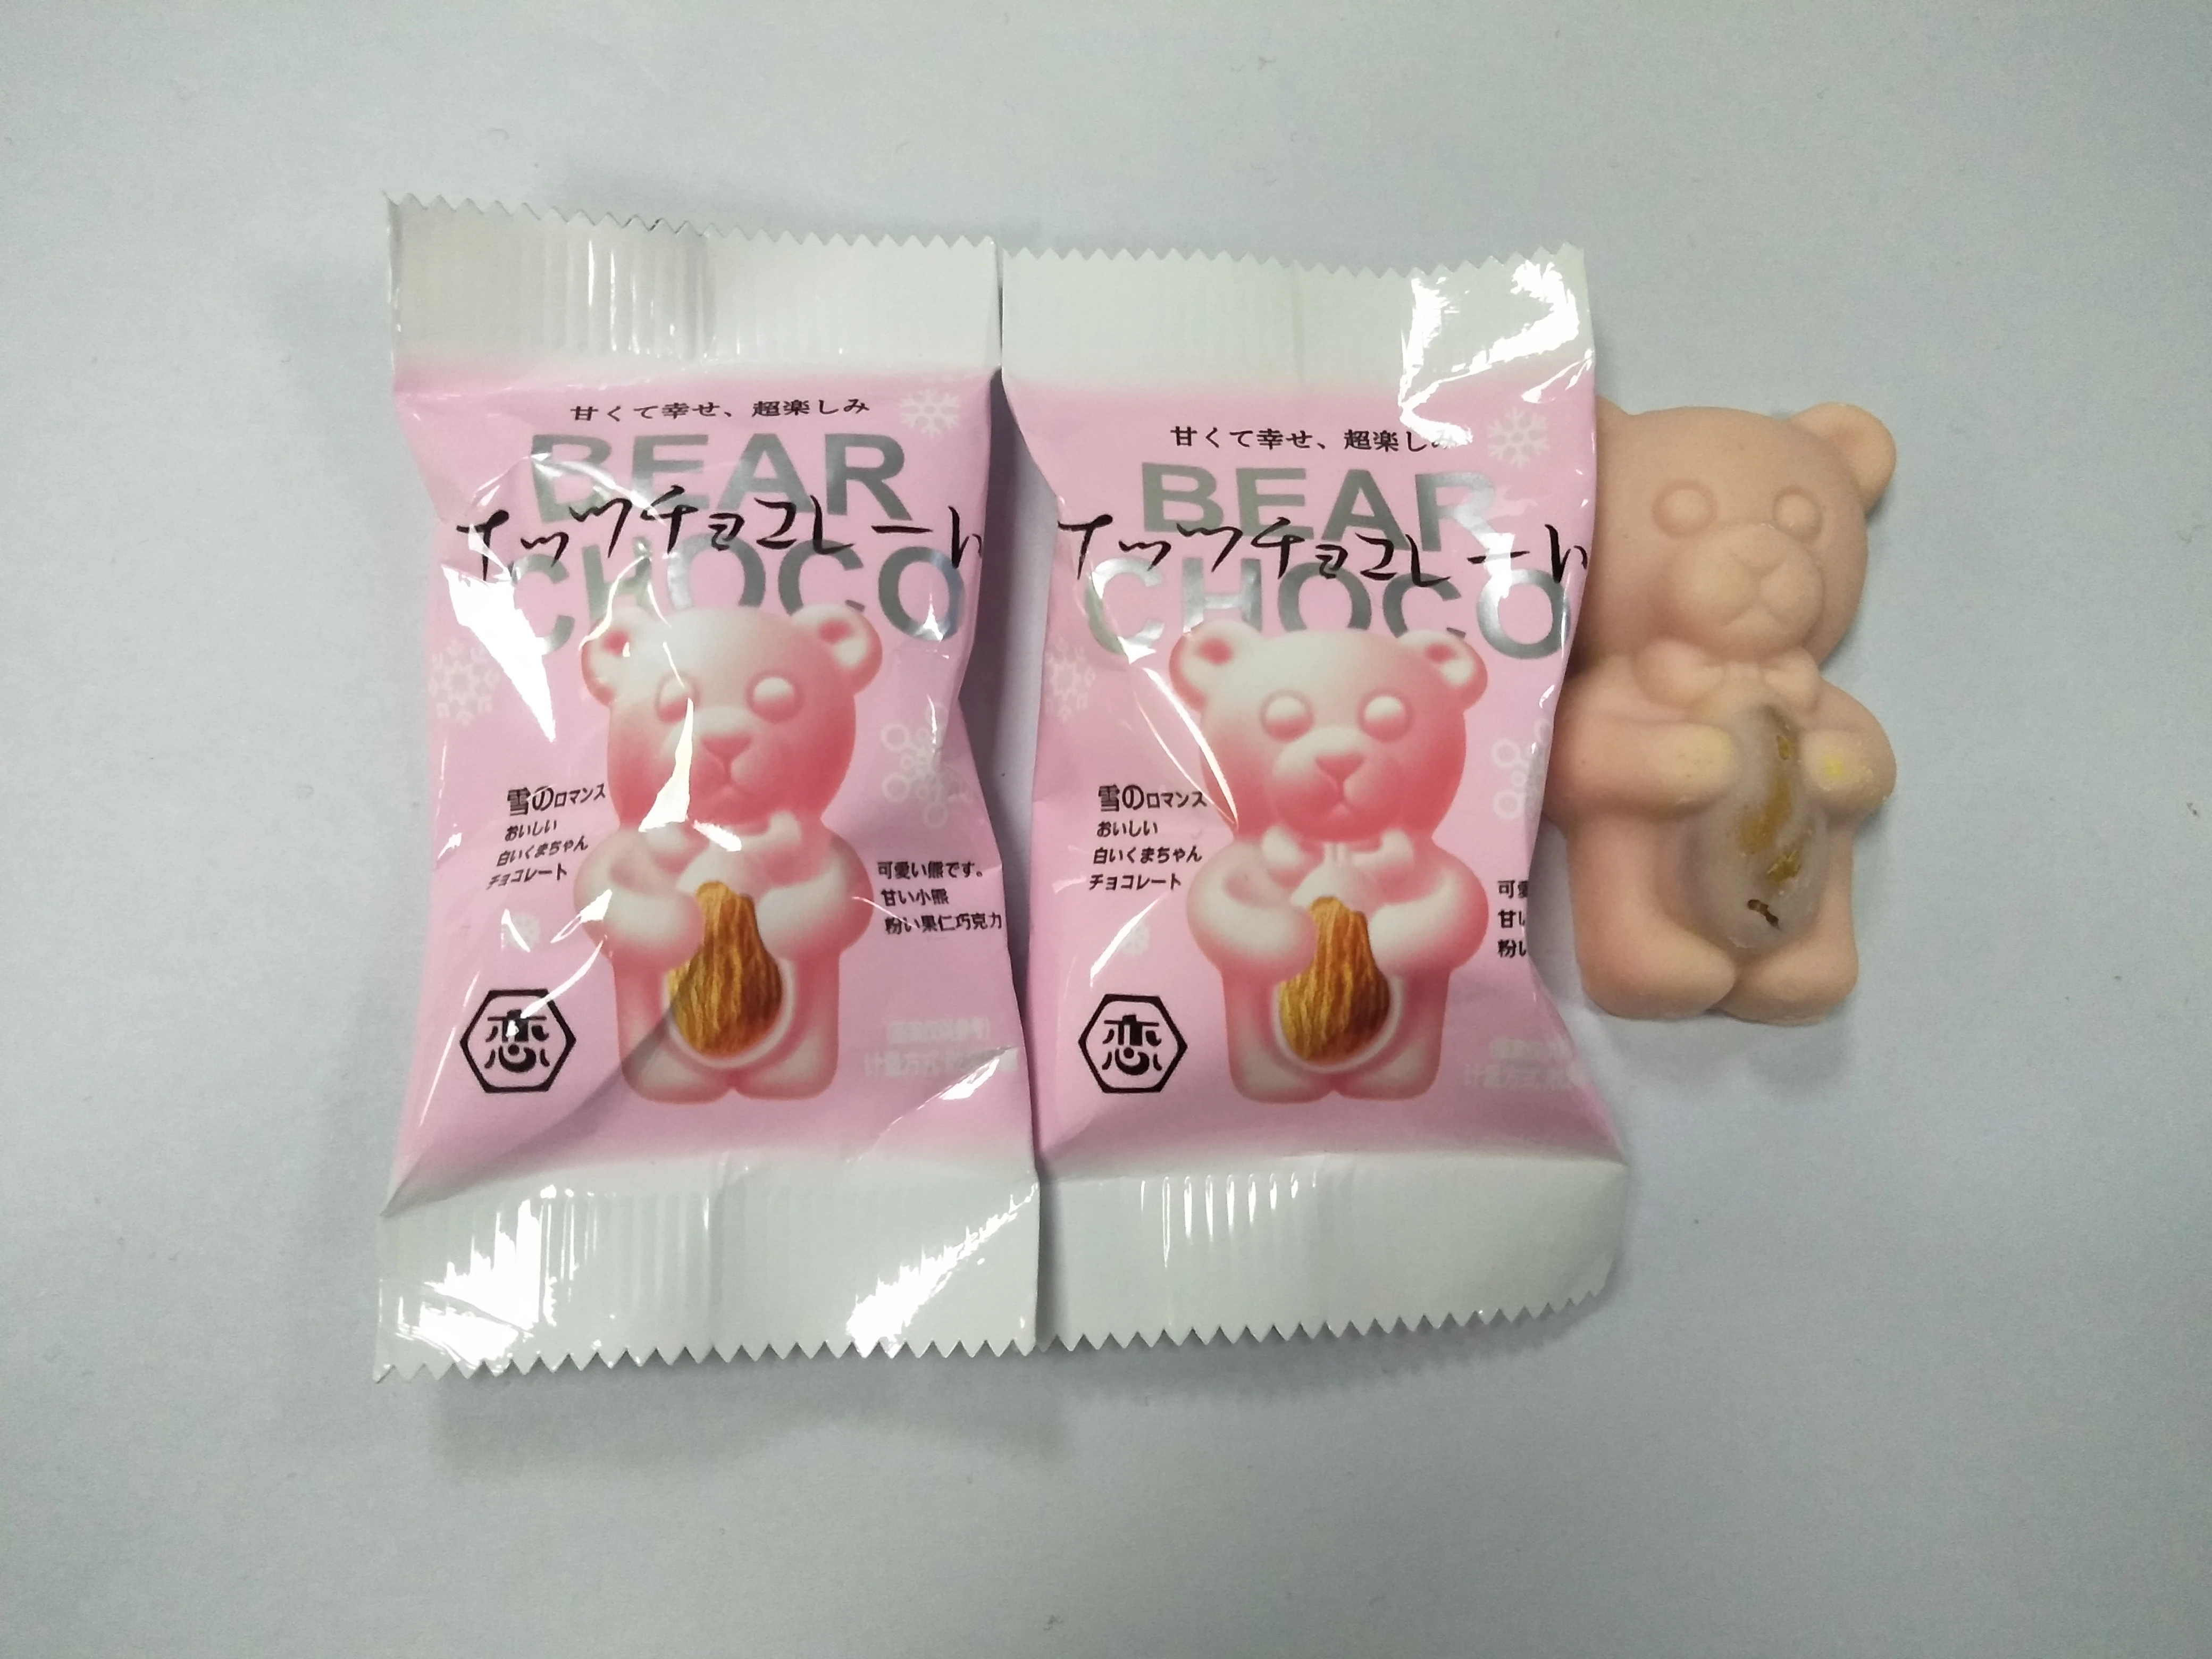 Hot Sale Cute Bear-shaped Delicious Crunchy Nut Casual Snack Almonds Whait Chocolate Candies